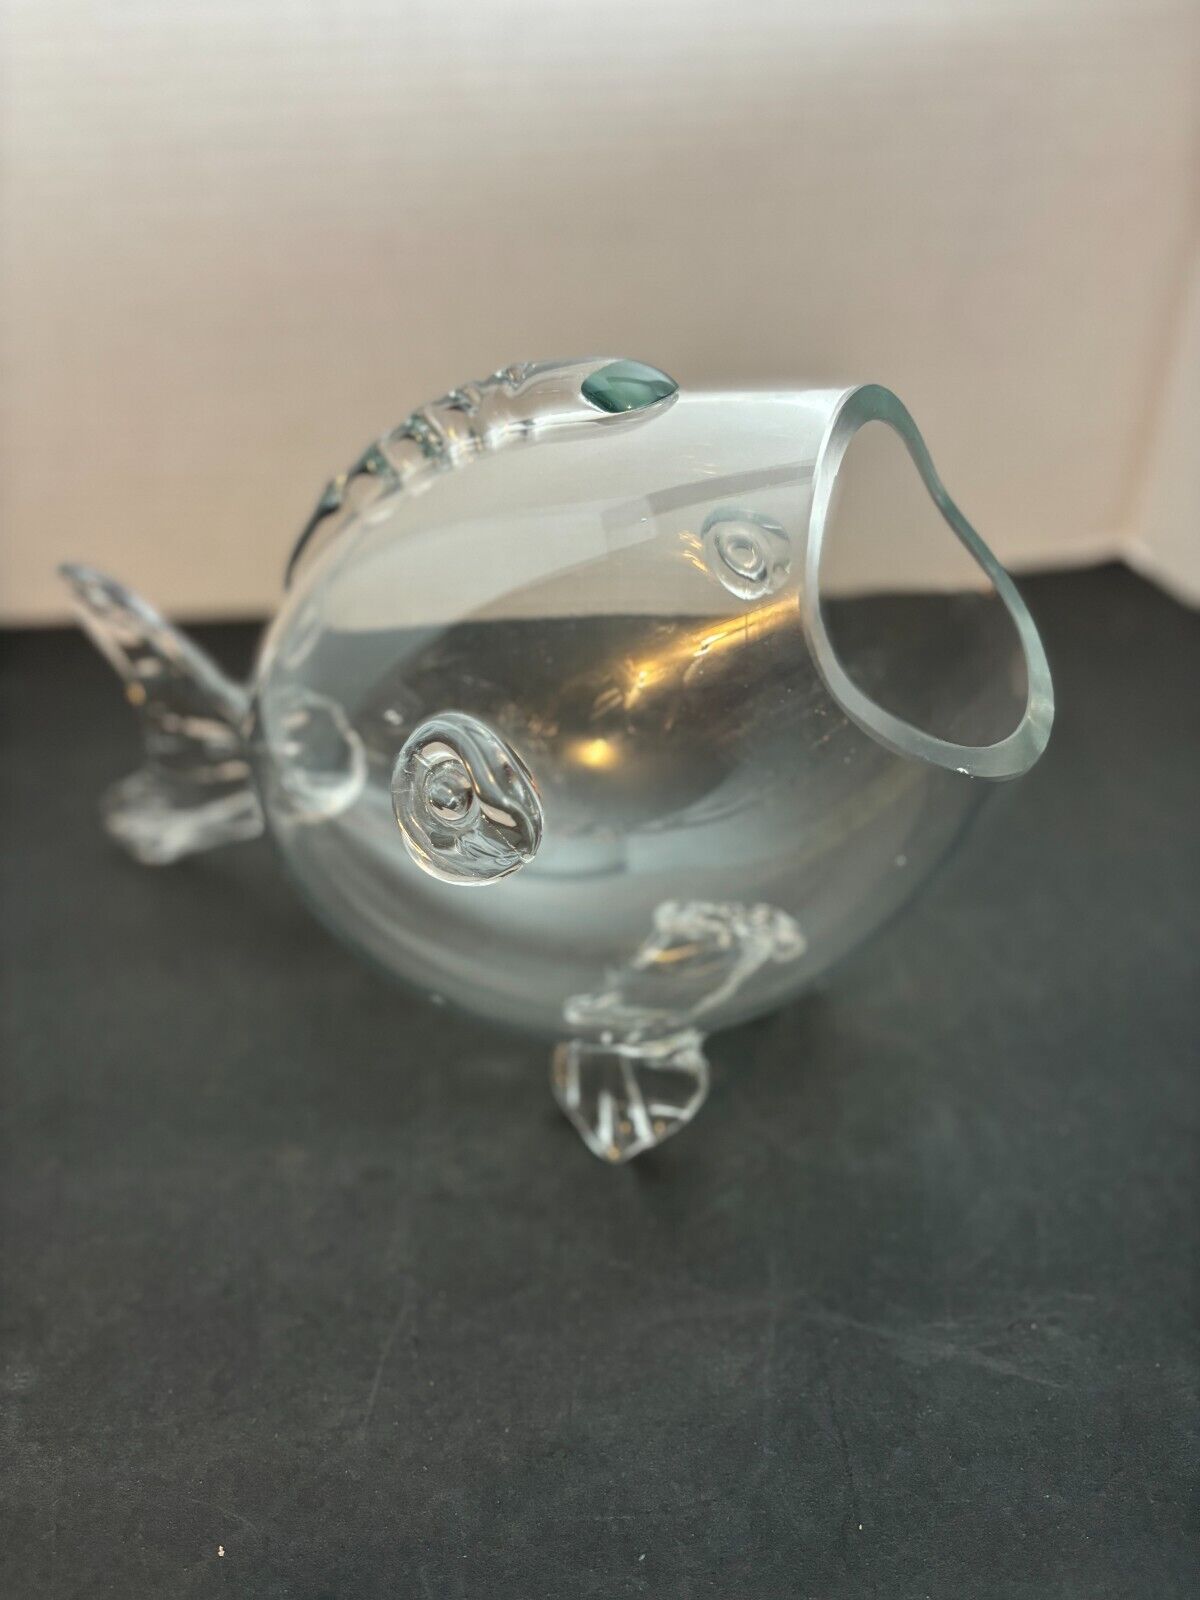 Vintage MCM Glass Fish Bowl so many ideas to use wine-ice-flowers-shells-candy